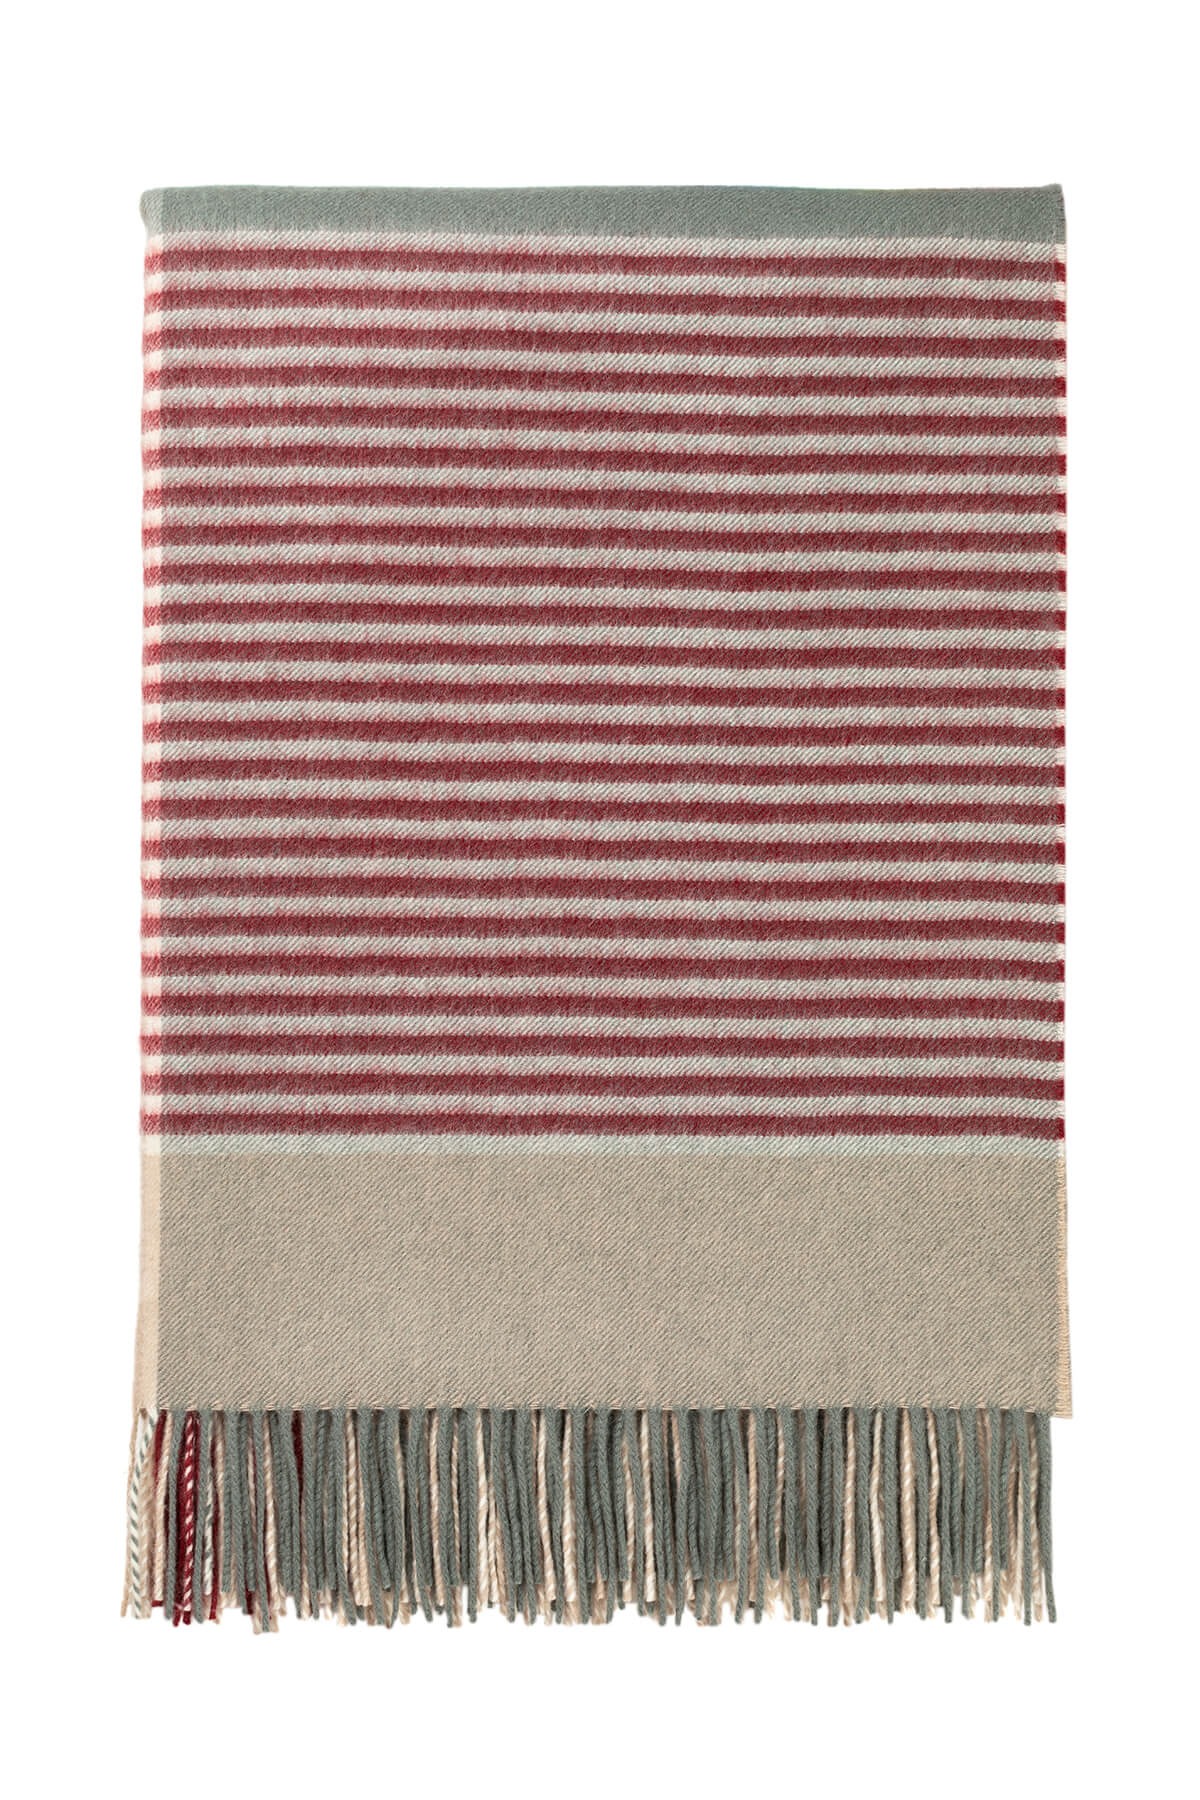 Close up of Johnstons of Elgin Red, Cream, and Grey Check Cashmere Christmas Blanket Fringing WA000055RU7450